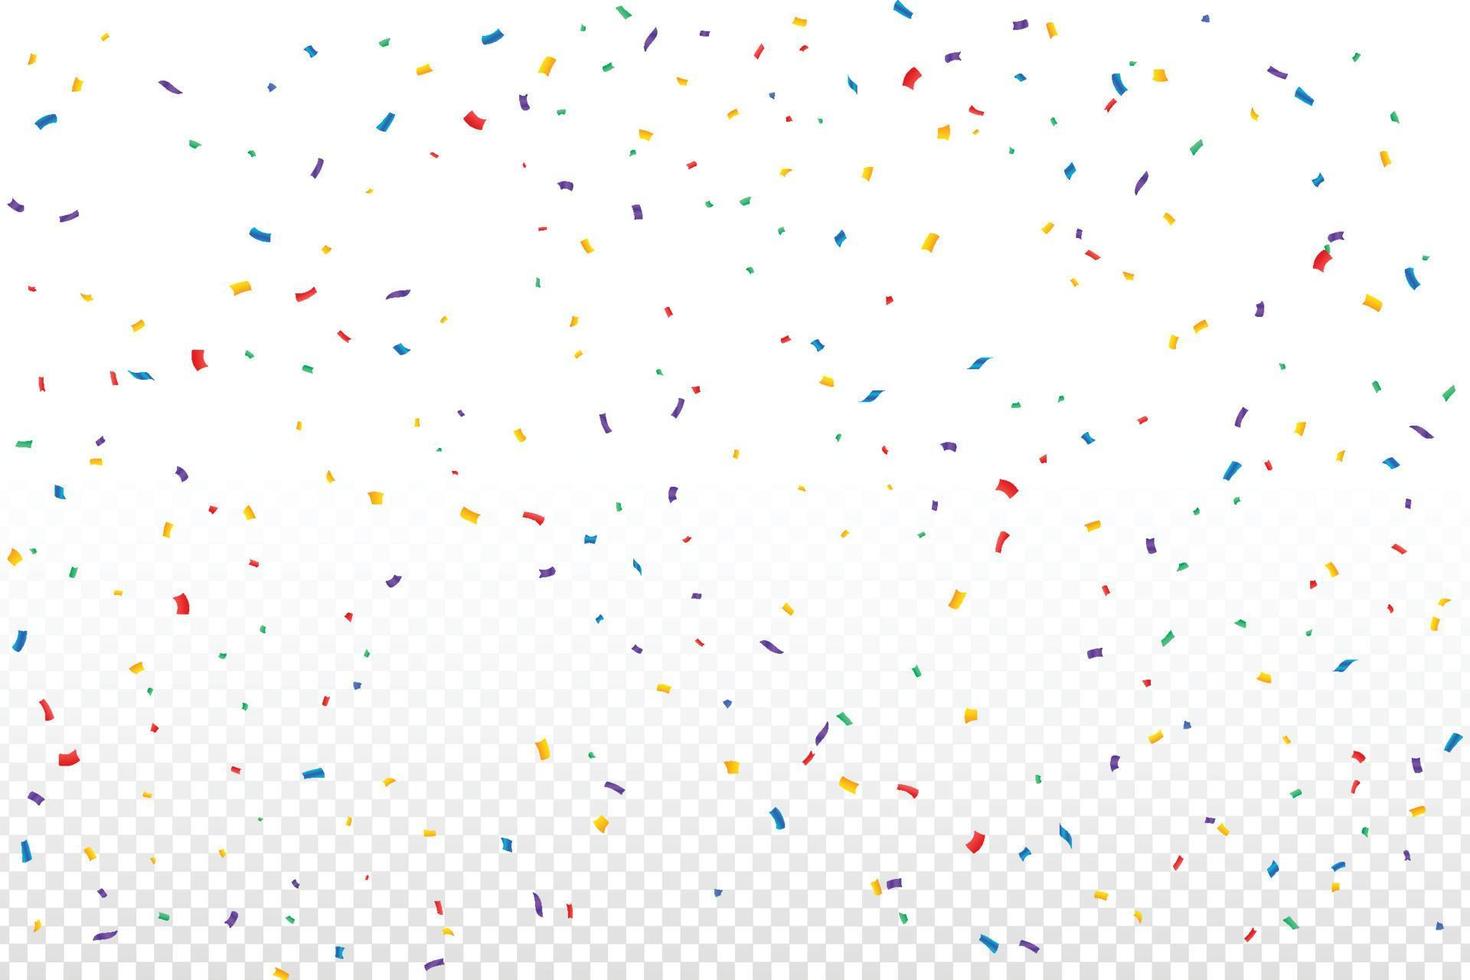 Colorful confetti falling isolated on transparent background. Anniversary and birthday celebration. Shiny tinsel and confetti falling. Festival elements. Confetti vector for carnival background.